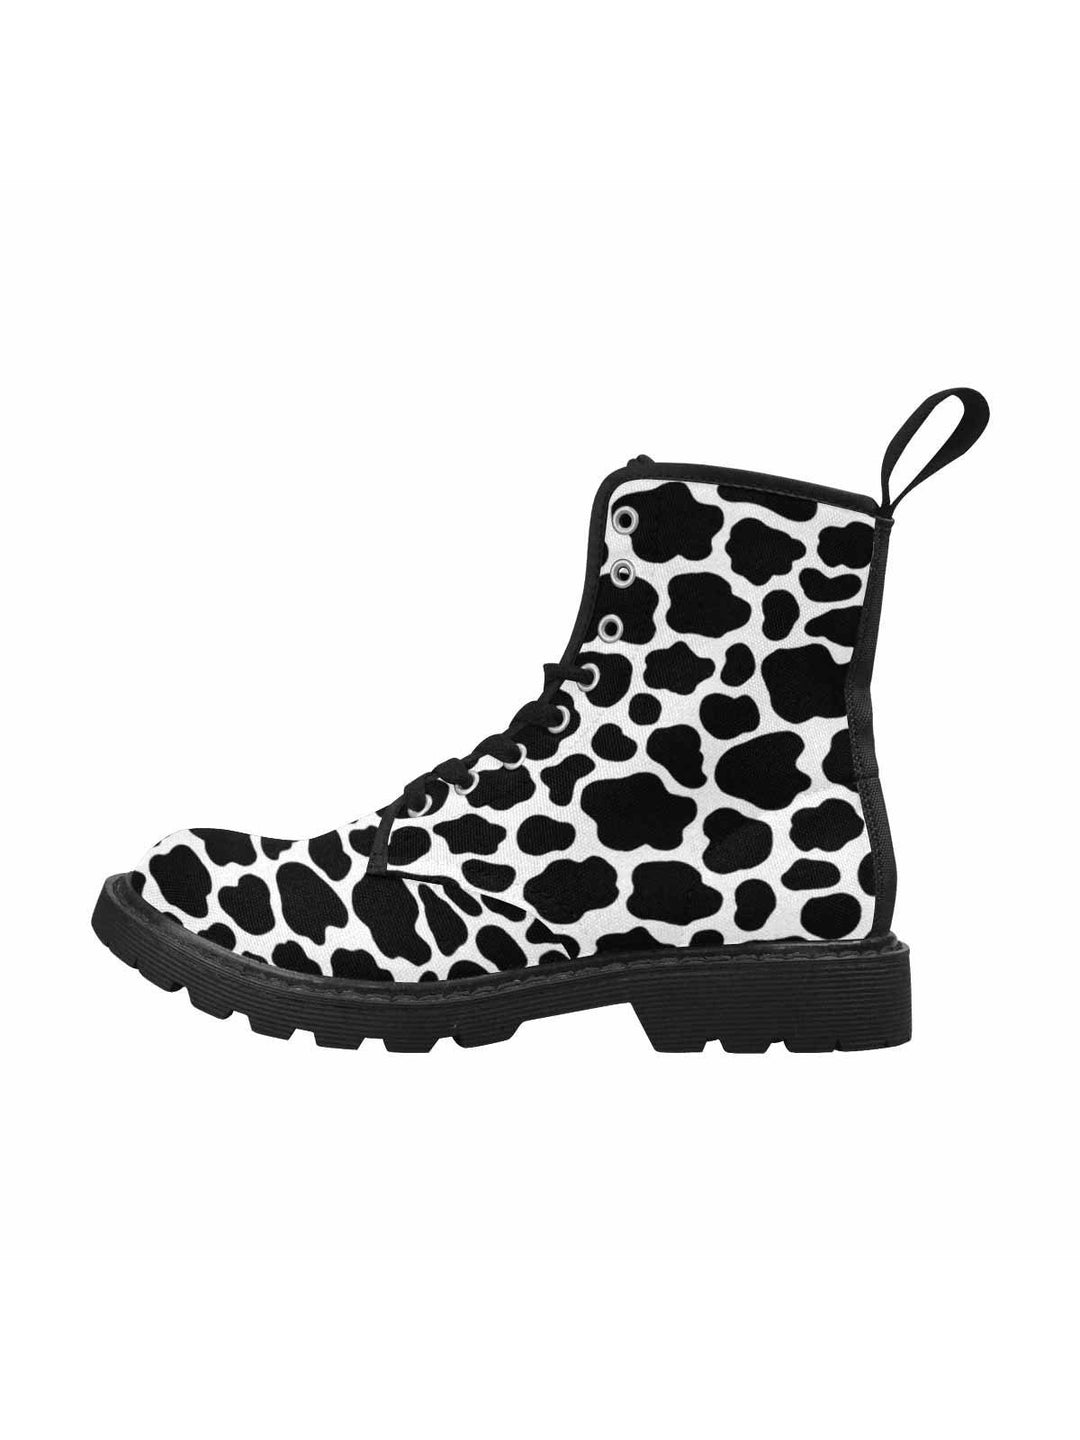 Moo Cows Lace Up Combat Boots